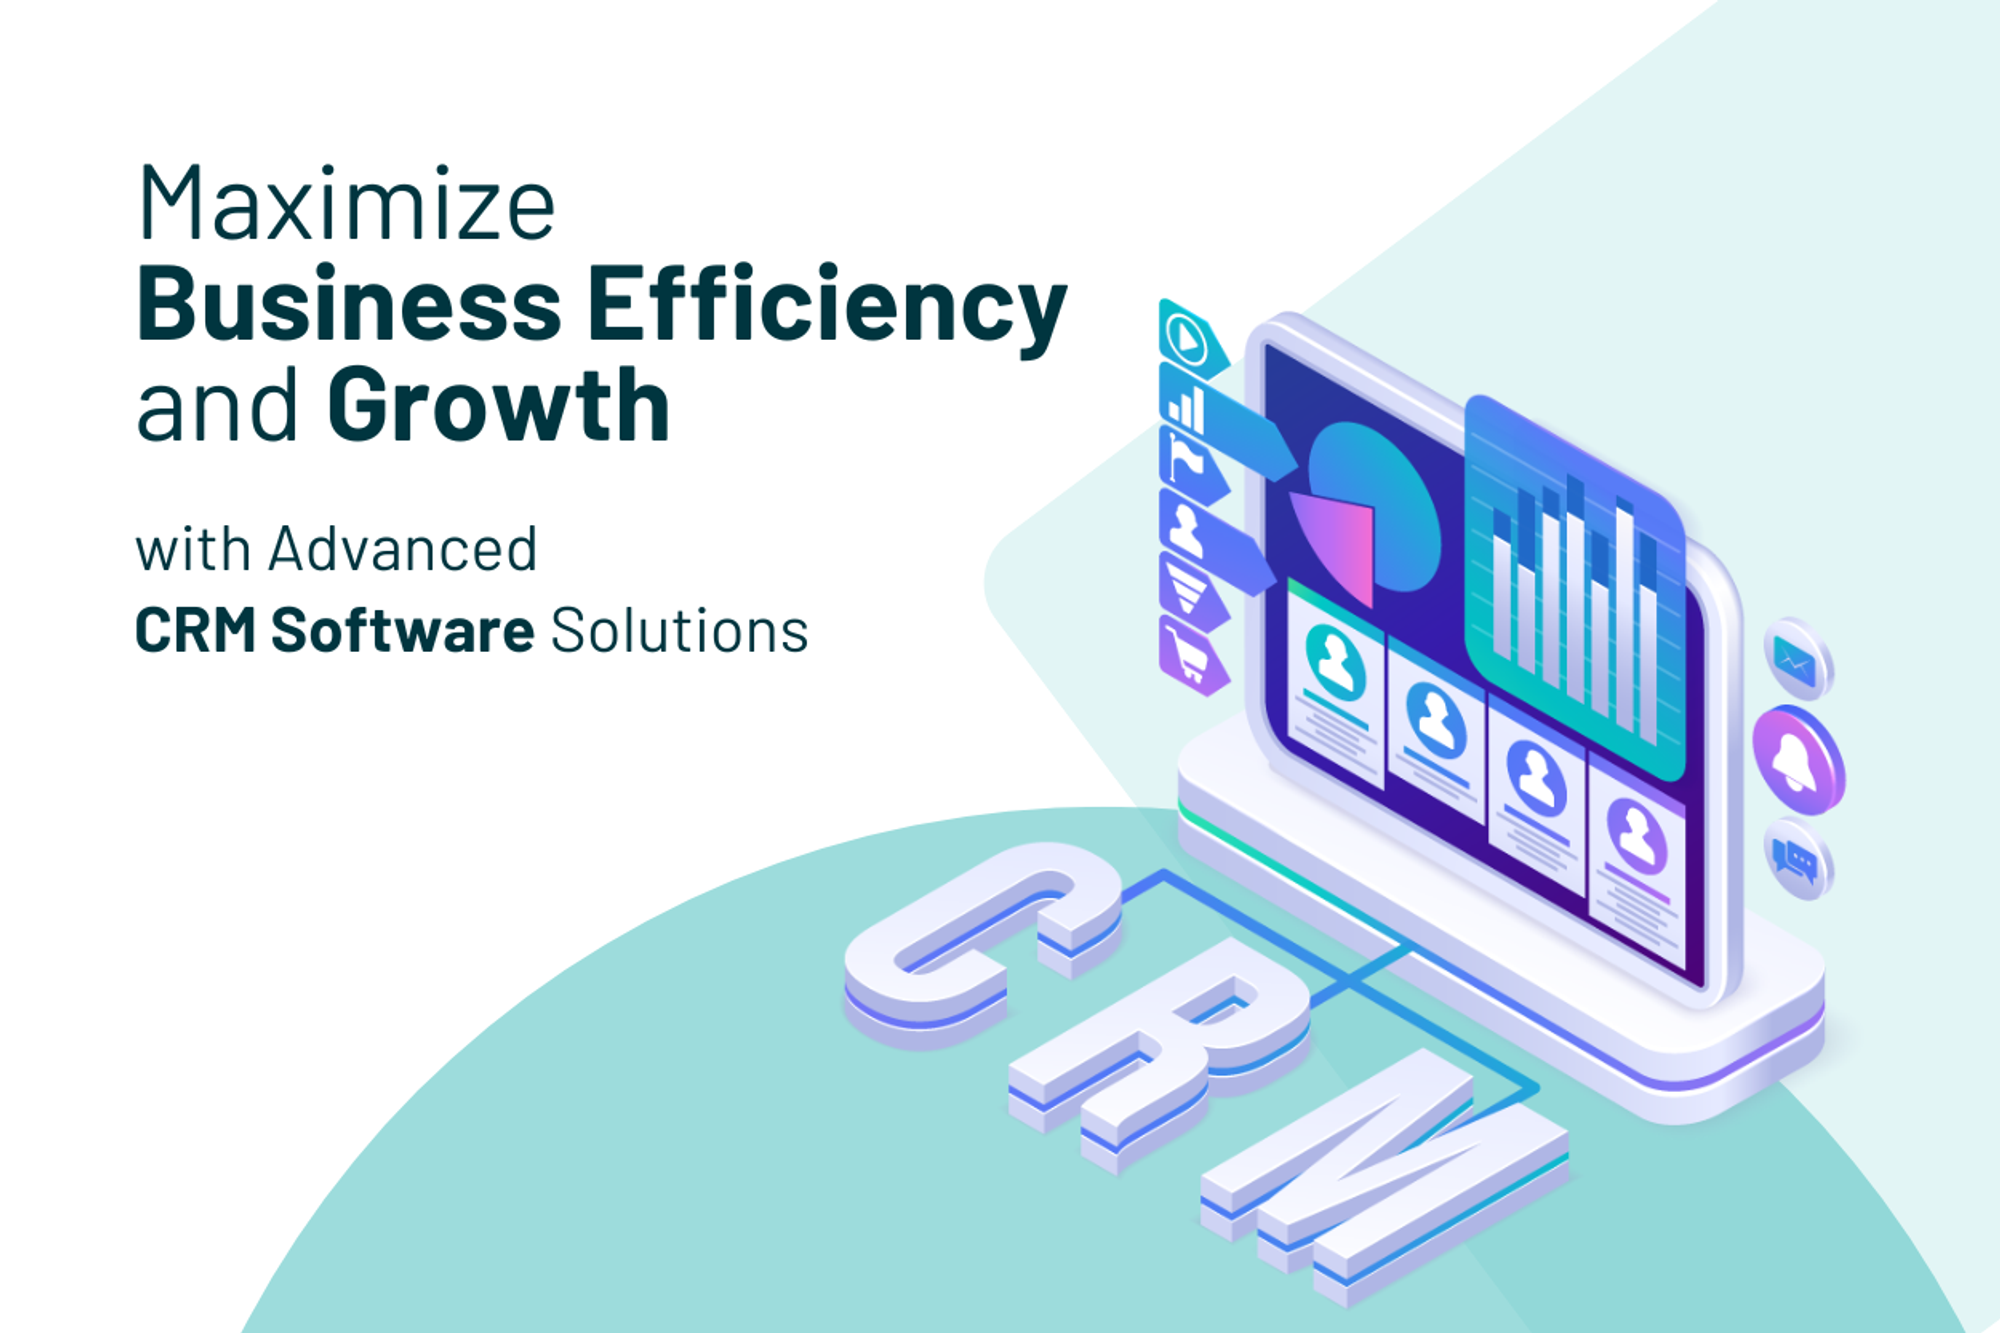 Maximize Business Efficiency and Growth with Advanced CRM Software Solutions